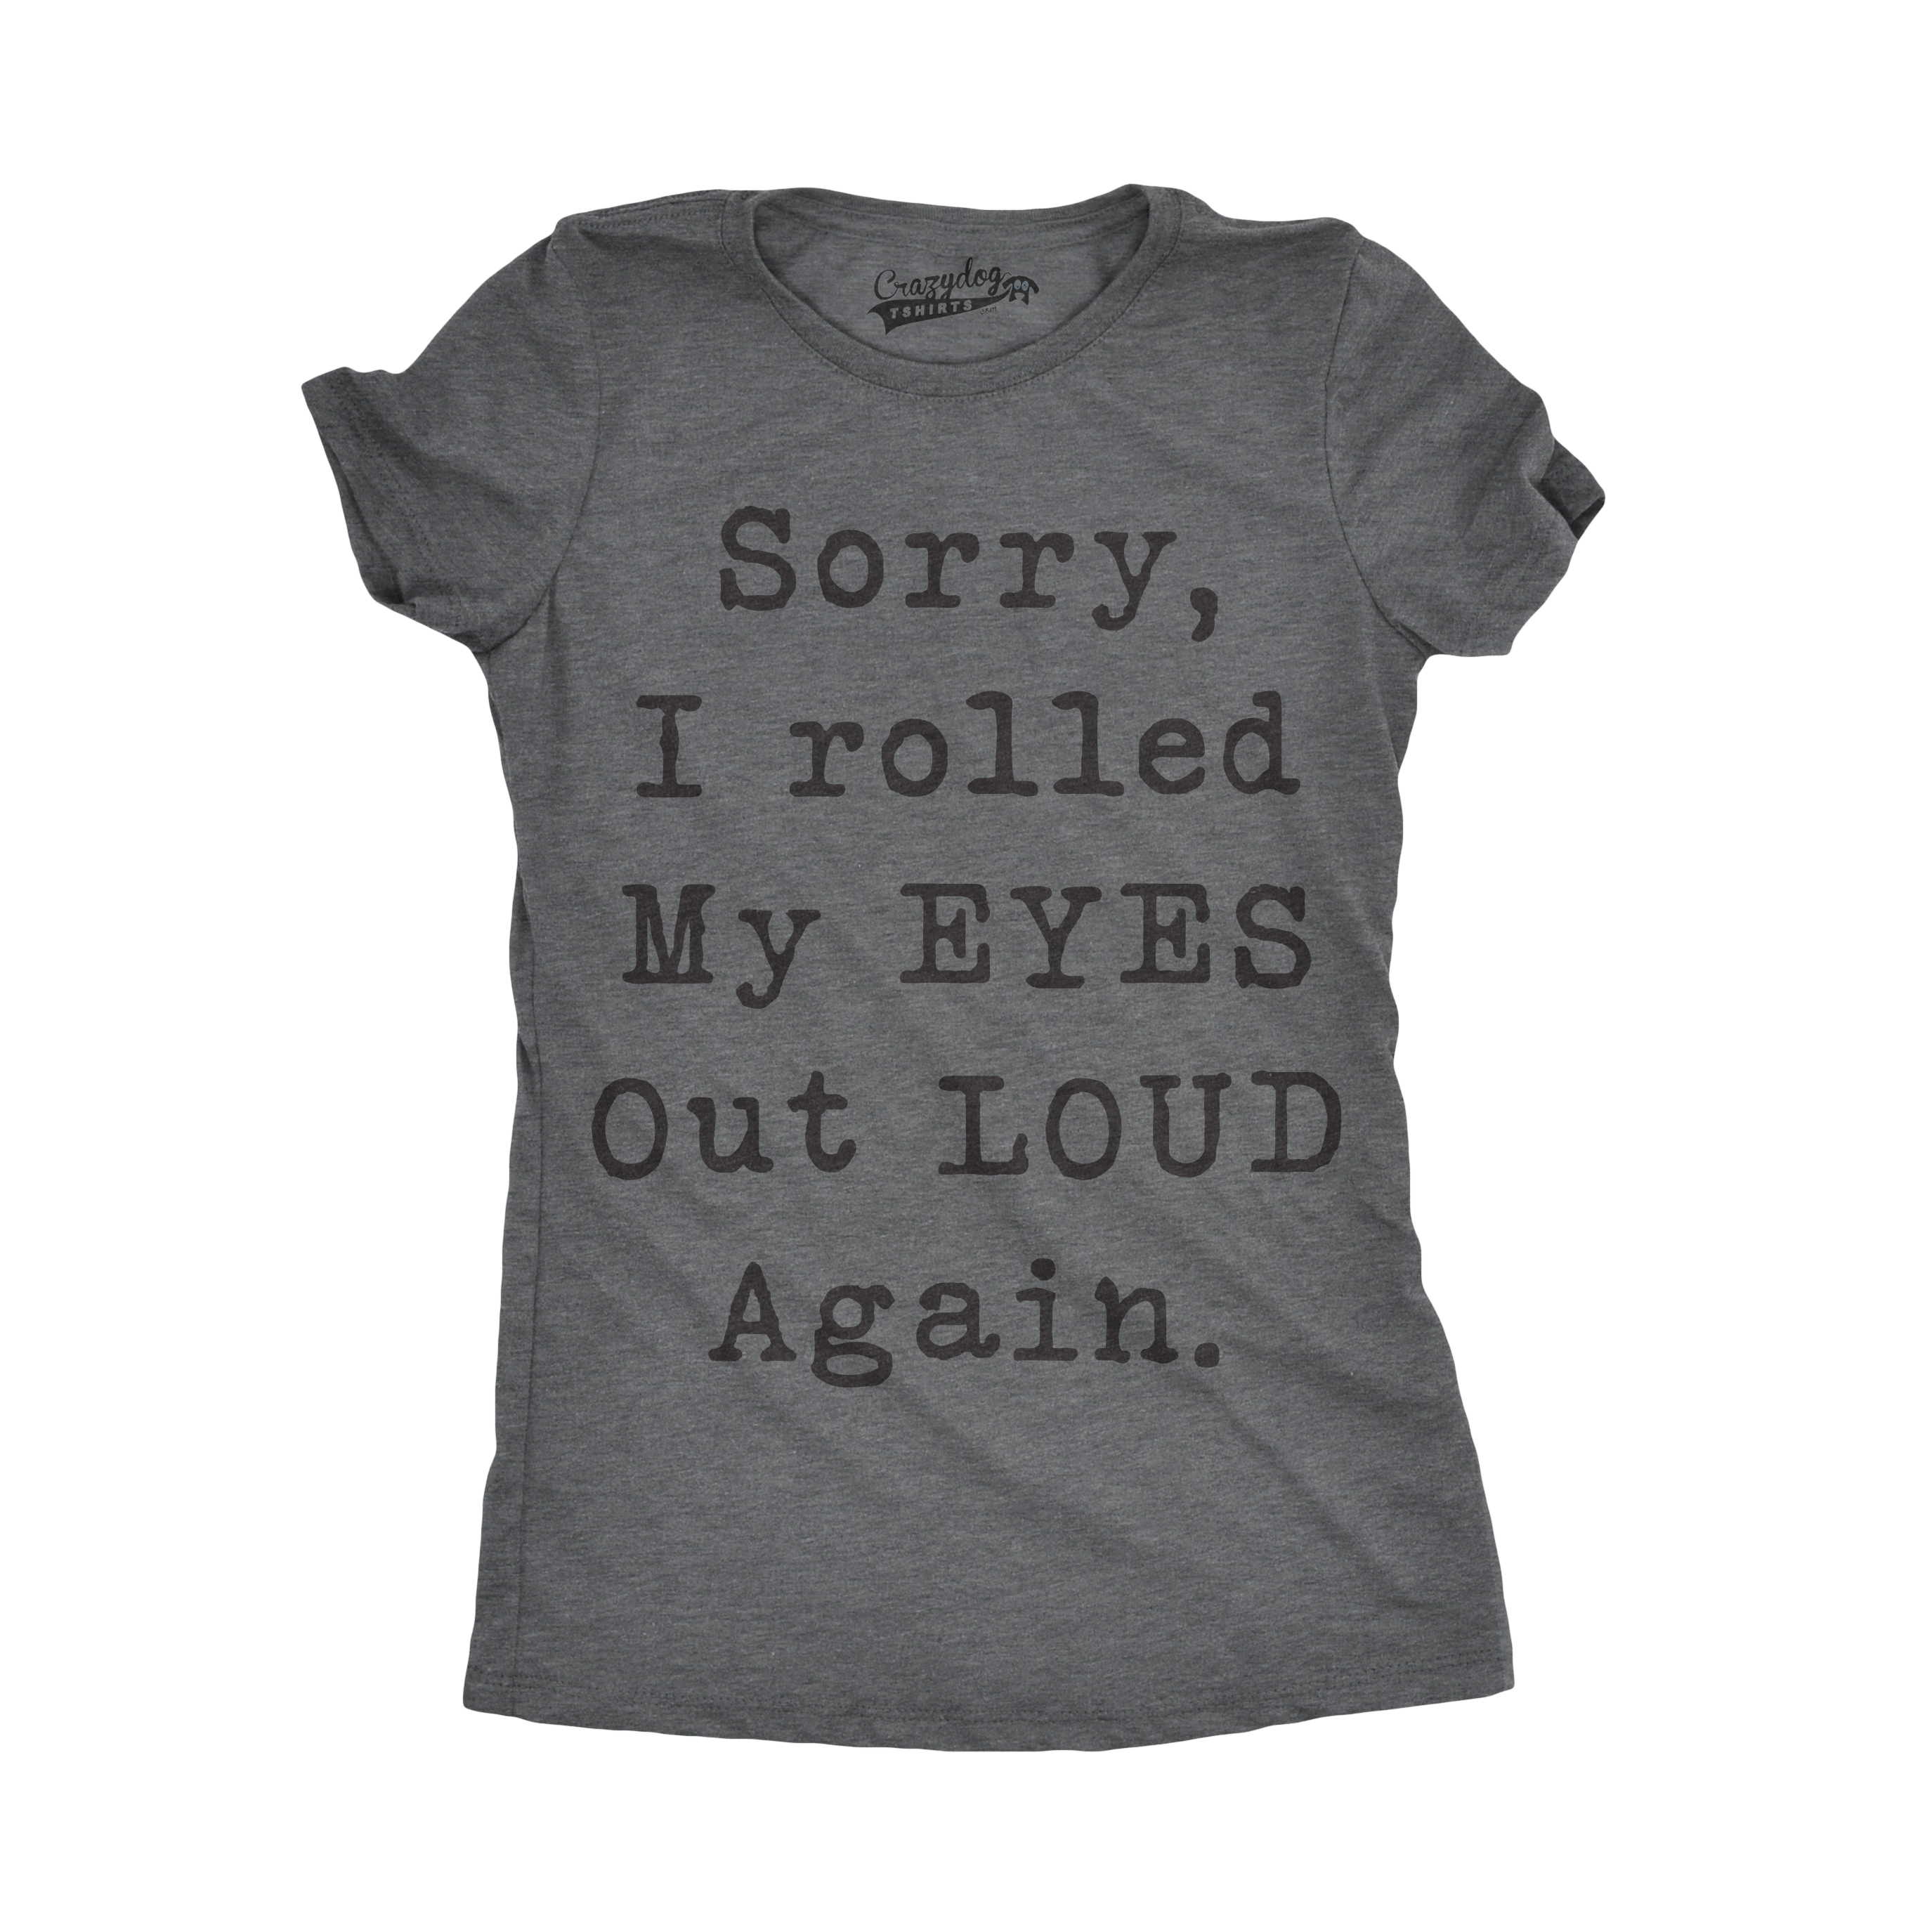 Crazy Dog Tshirts Womens Sorry Rolled My Eyes Out Loud Funny Sassy Sayings Cute Graphic T shirt